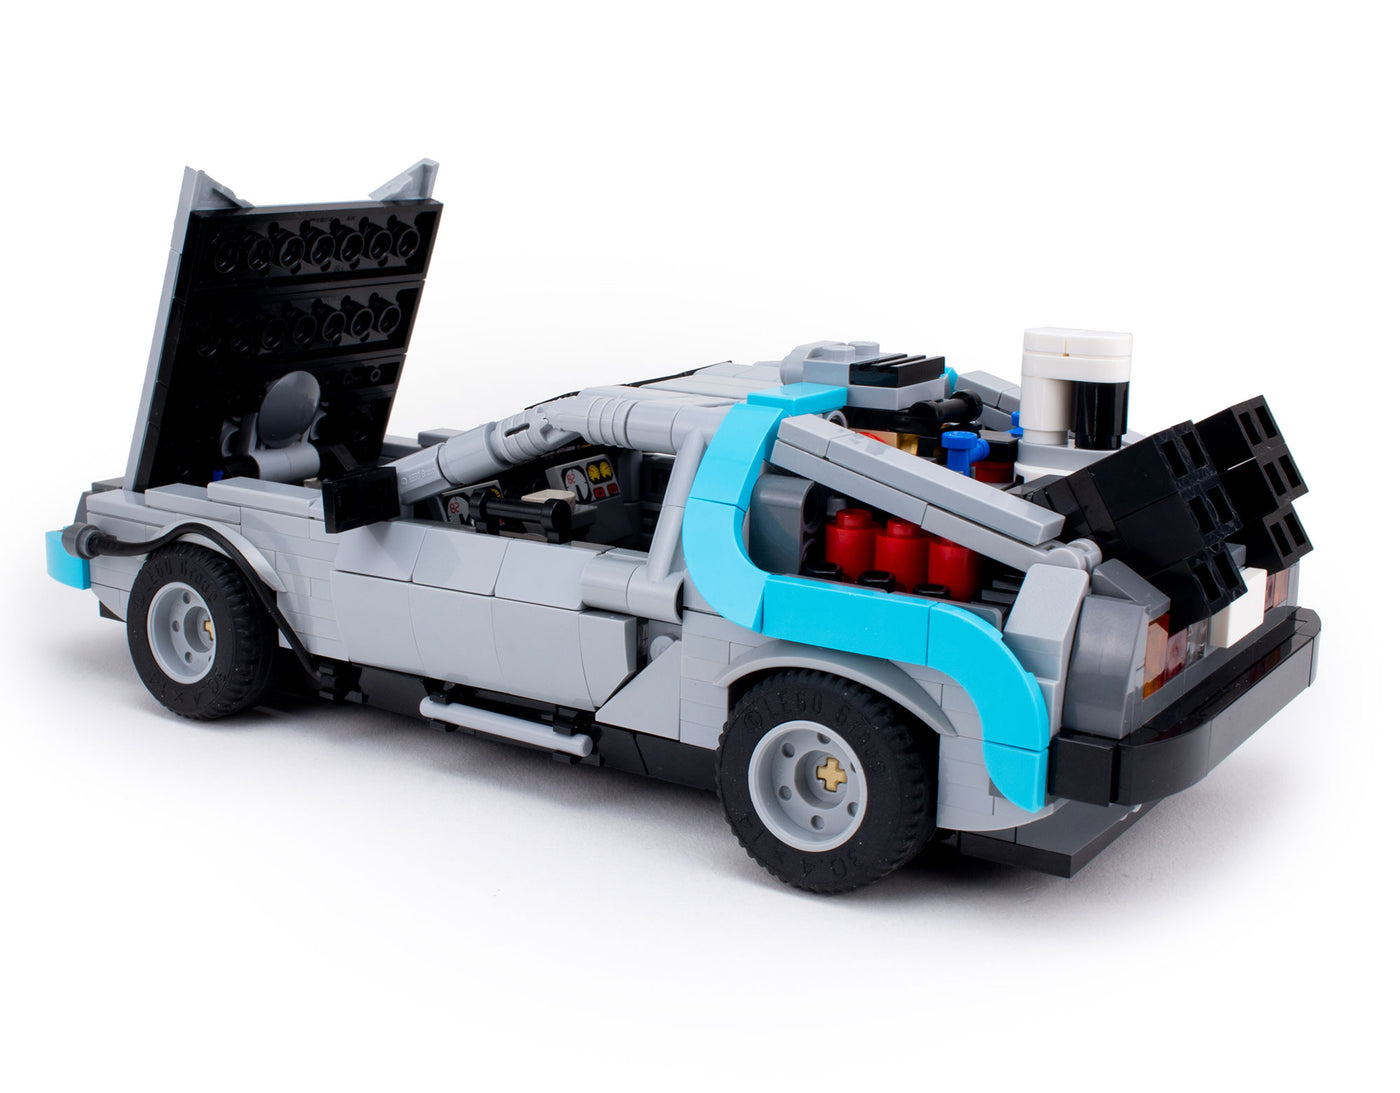 LEGO Remakes the Back to the Future DeLorean as 3-in-1 Set